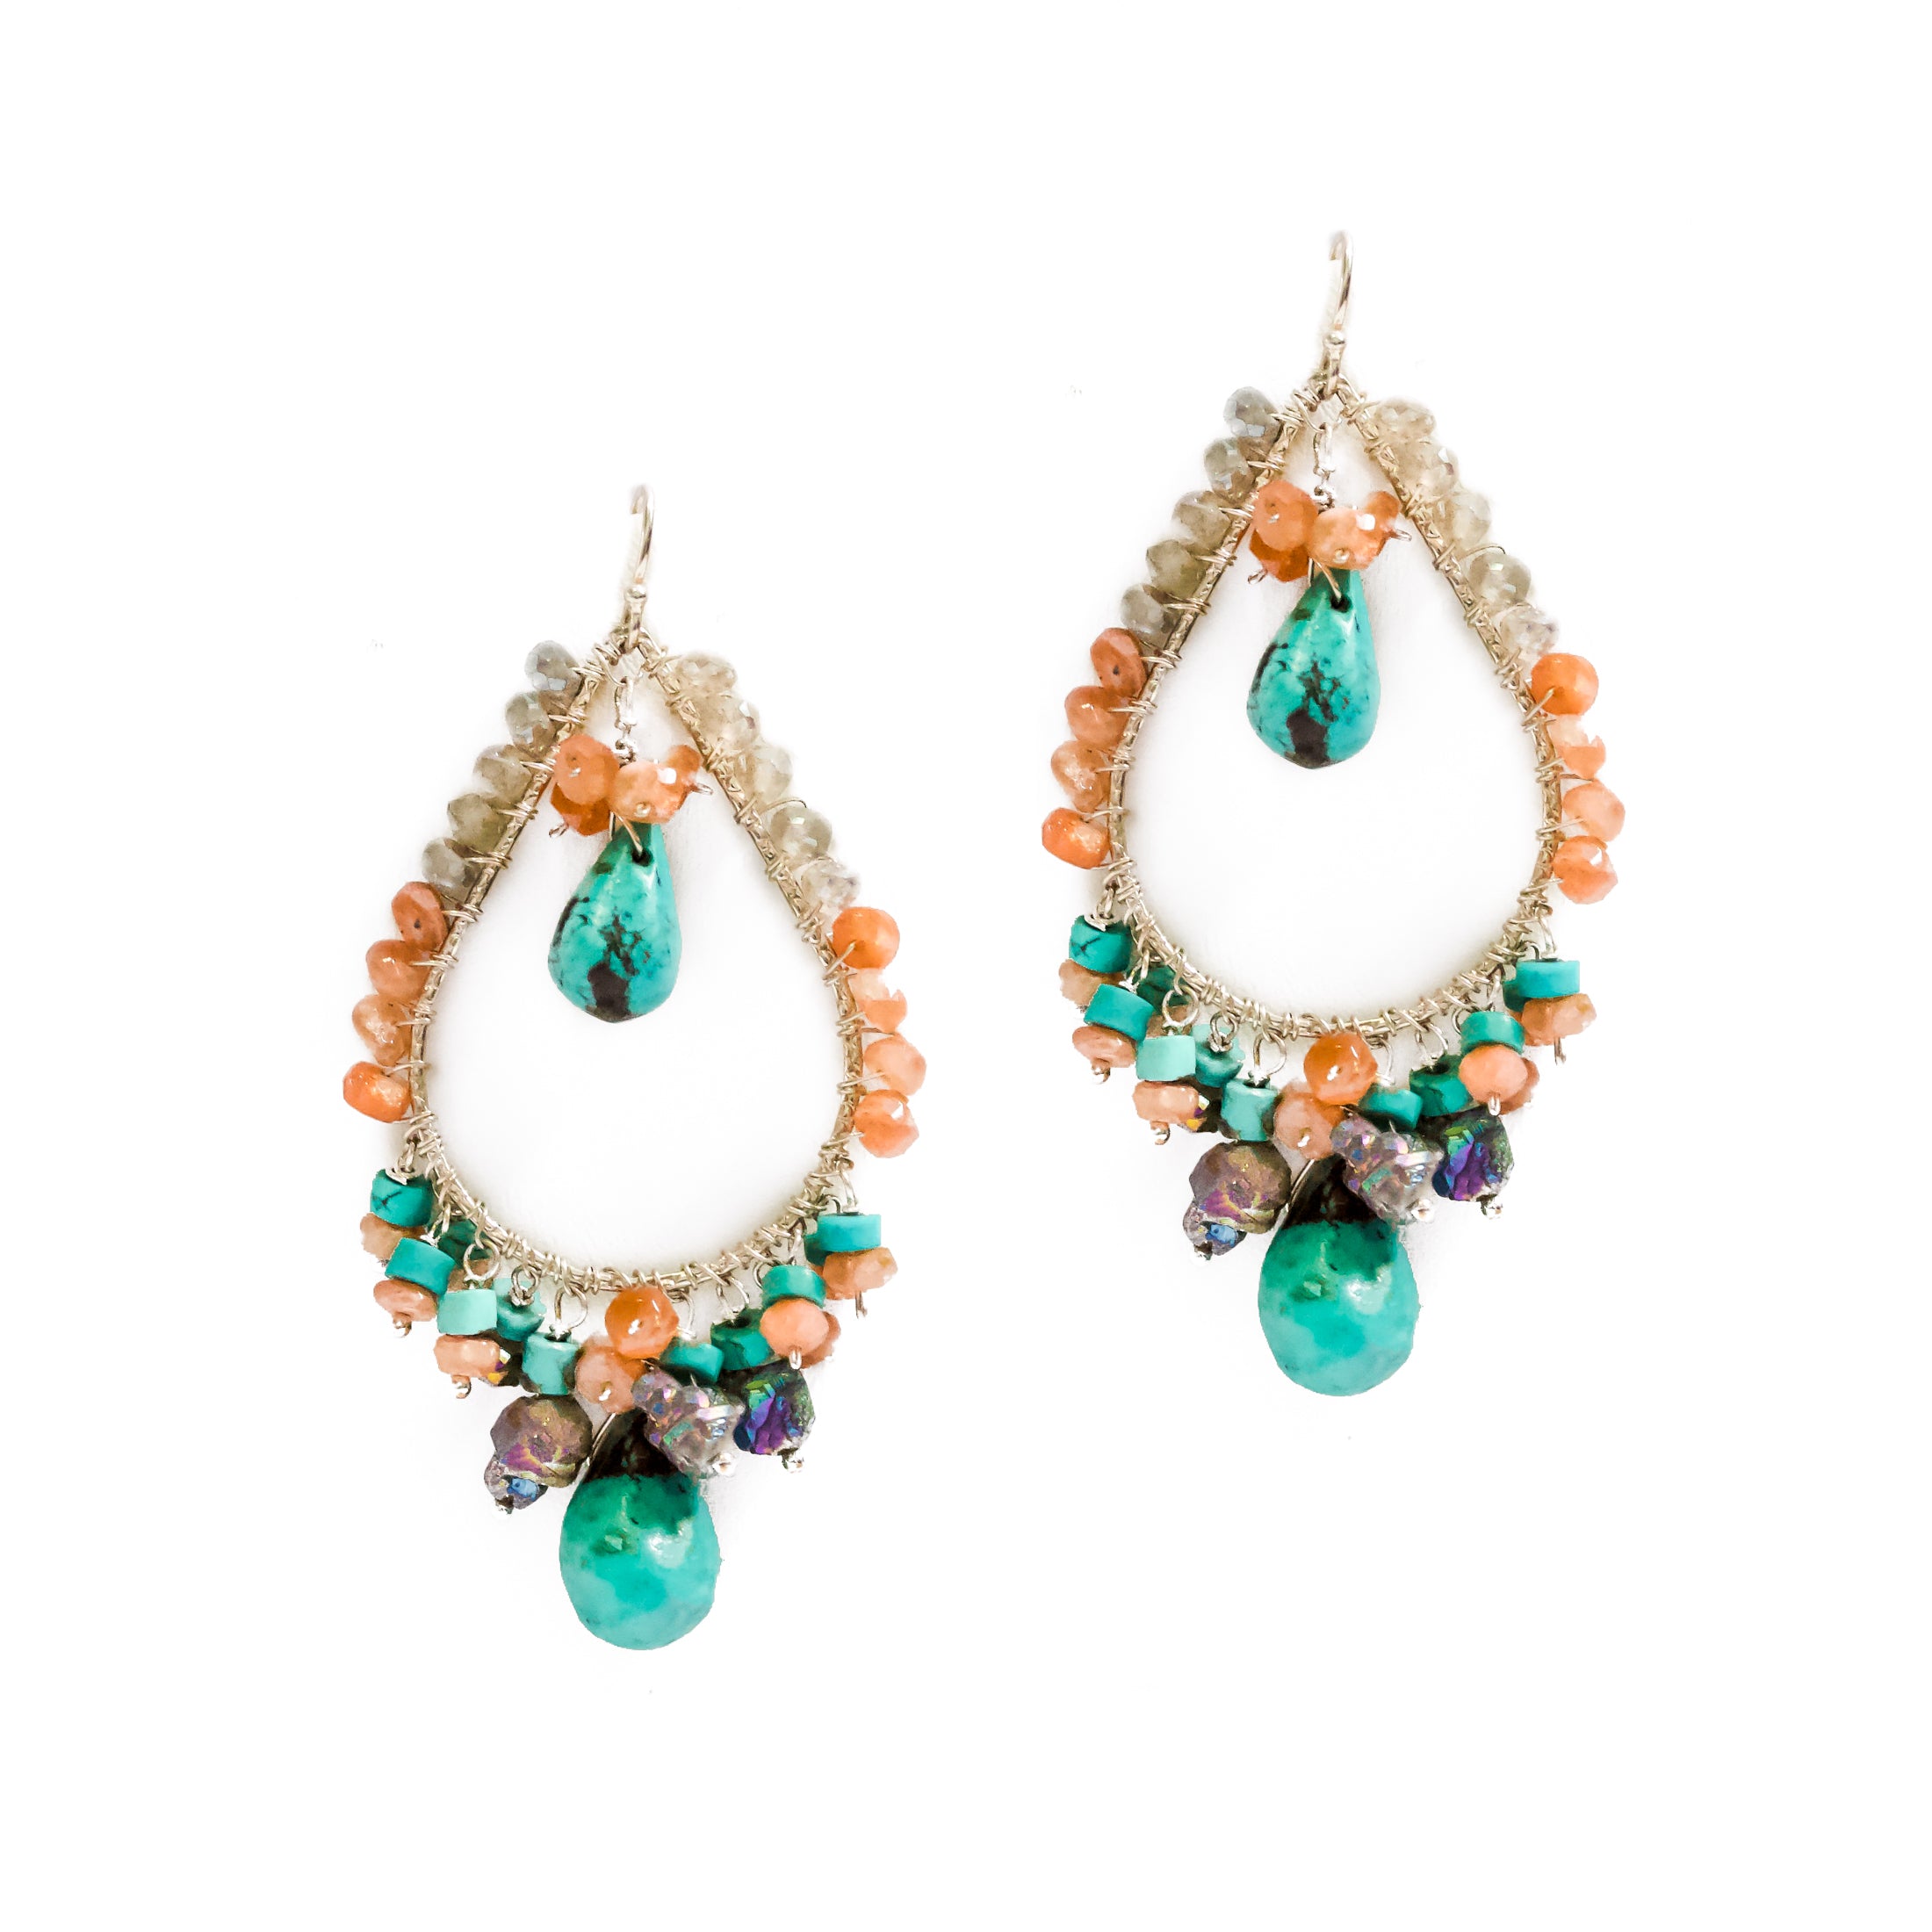 "Starlet" Turquoise Statement Earrings